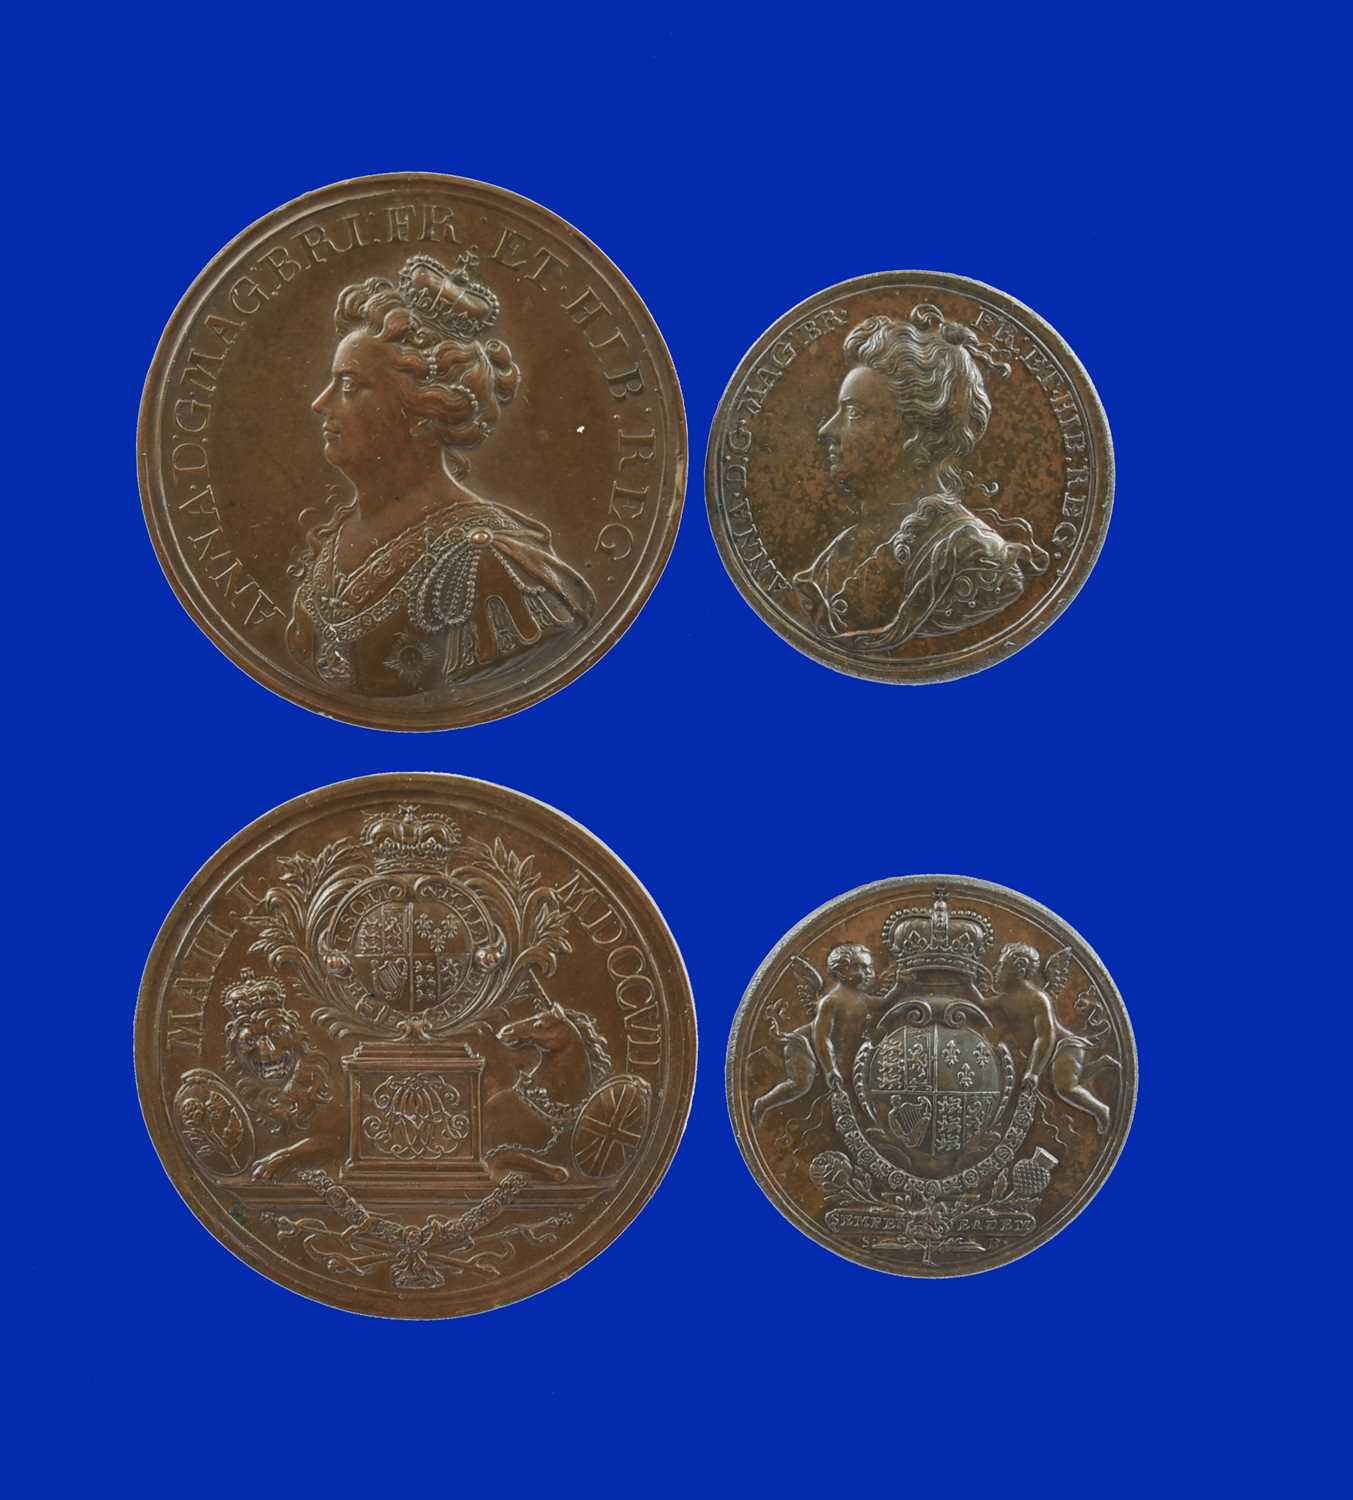 Anne, Union of England and Scotland 1707, a copper medal by J. Croker, bust left, rev. shield in